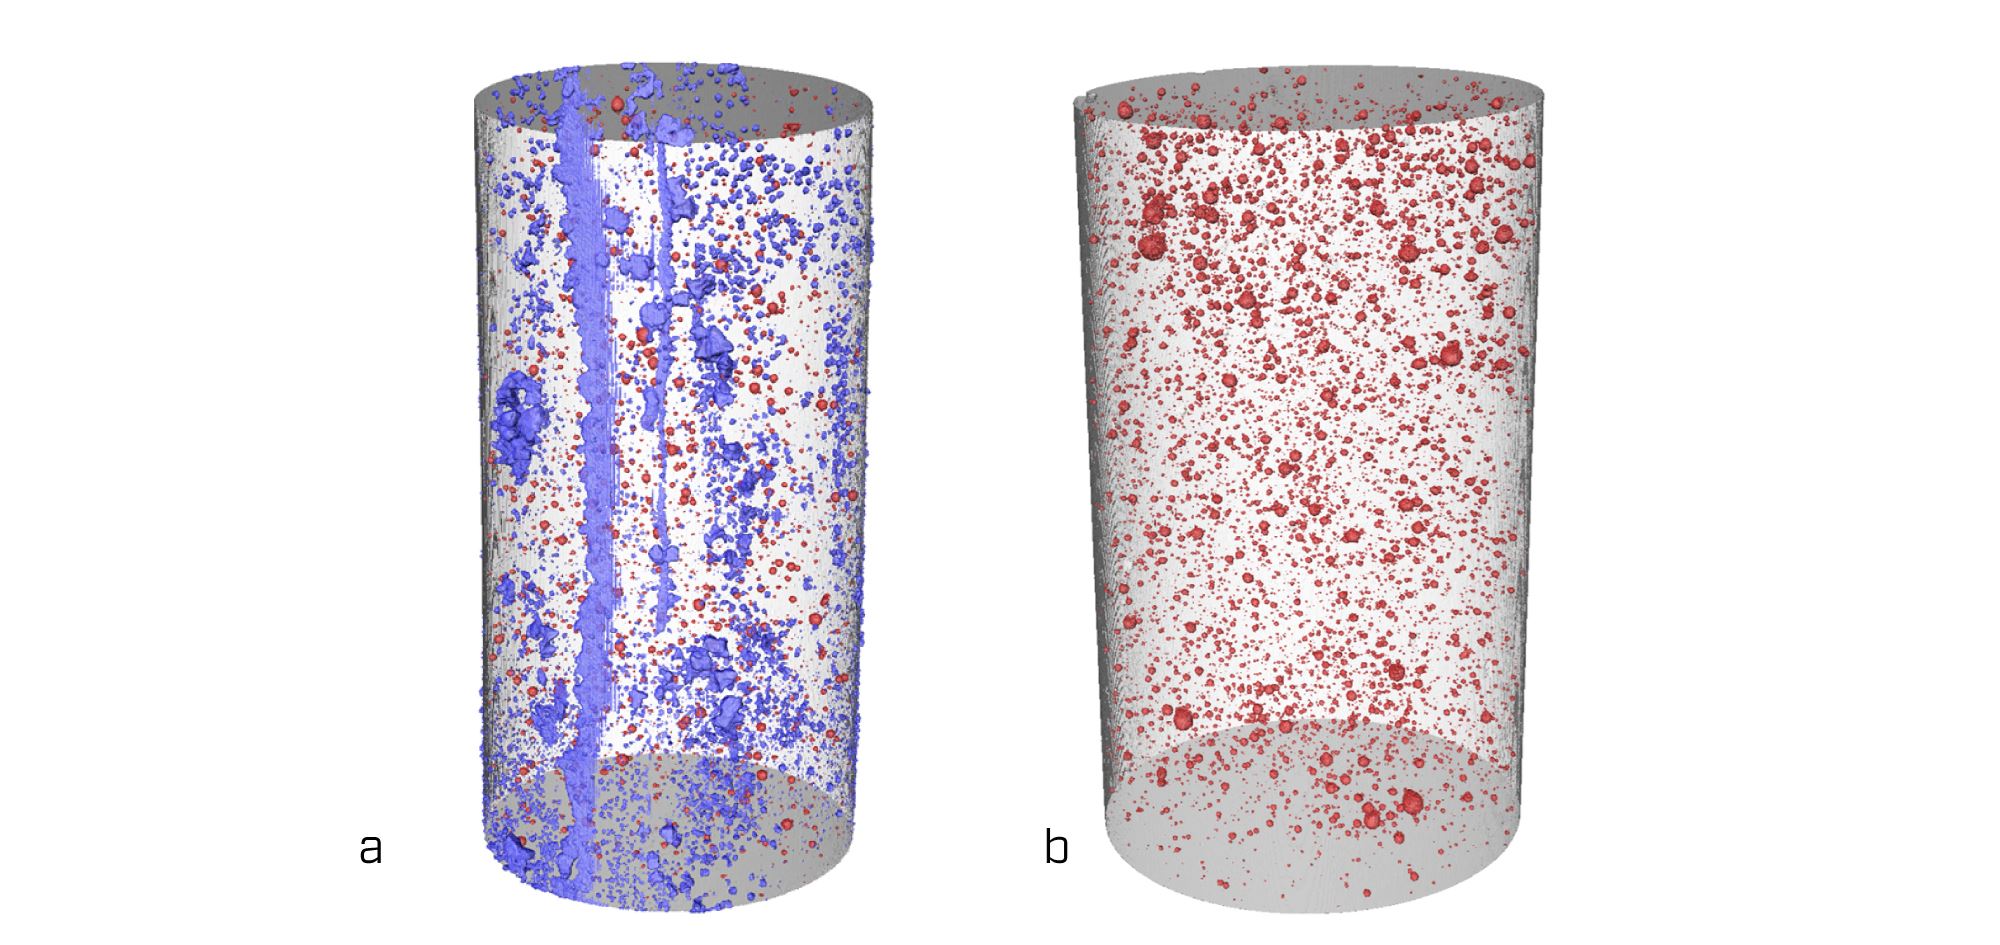 Figure 1: A tomography reconstruction of macro-porosity and crystal precipitation on the surface of micro-silica containing cement plugs exposed to CO₂-brine mixture: (a) After exposure for four weeks; (b) Reference (unexposed) sample. Red – voids, blue – precipitated particles on thesurface.